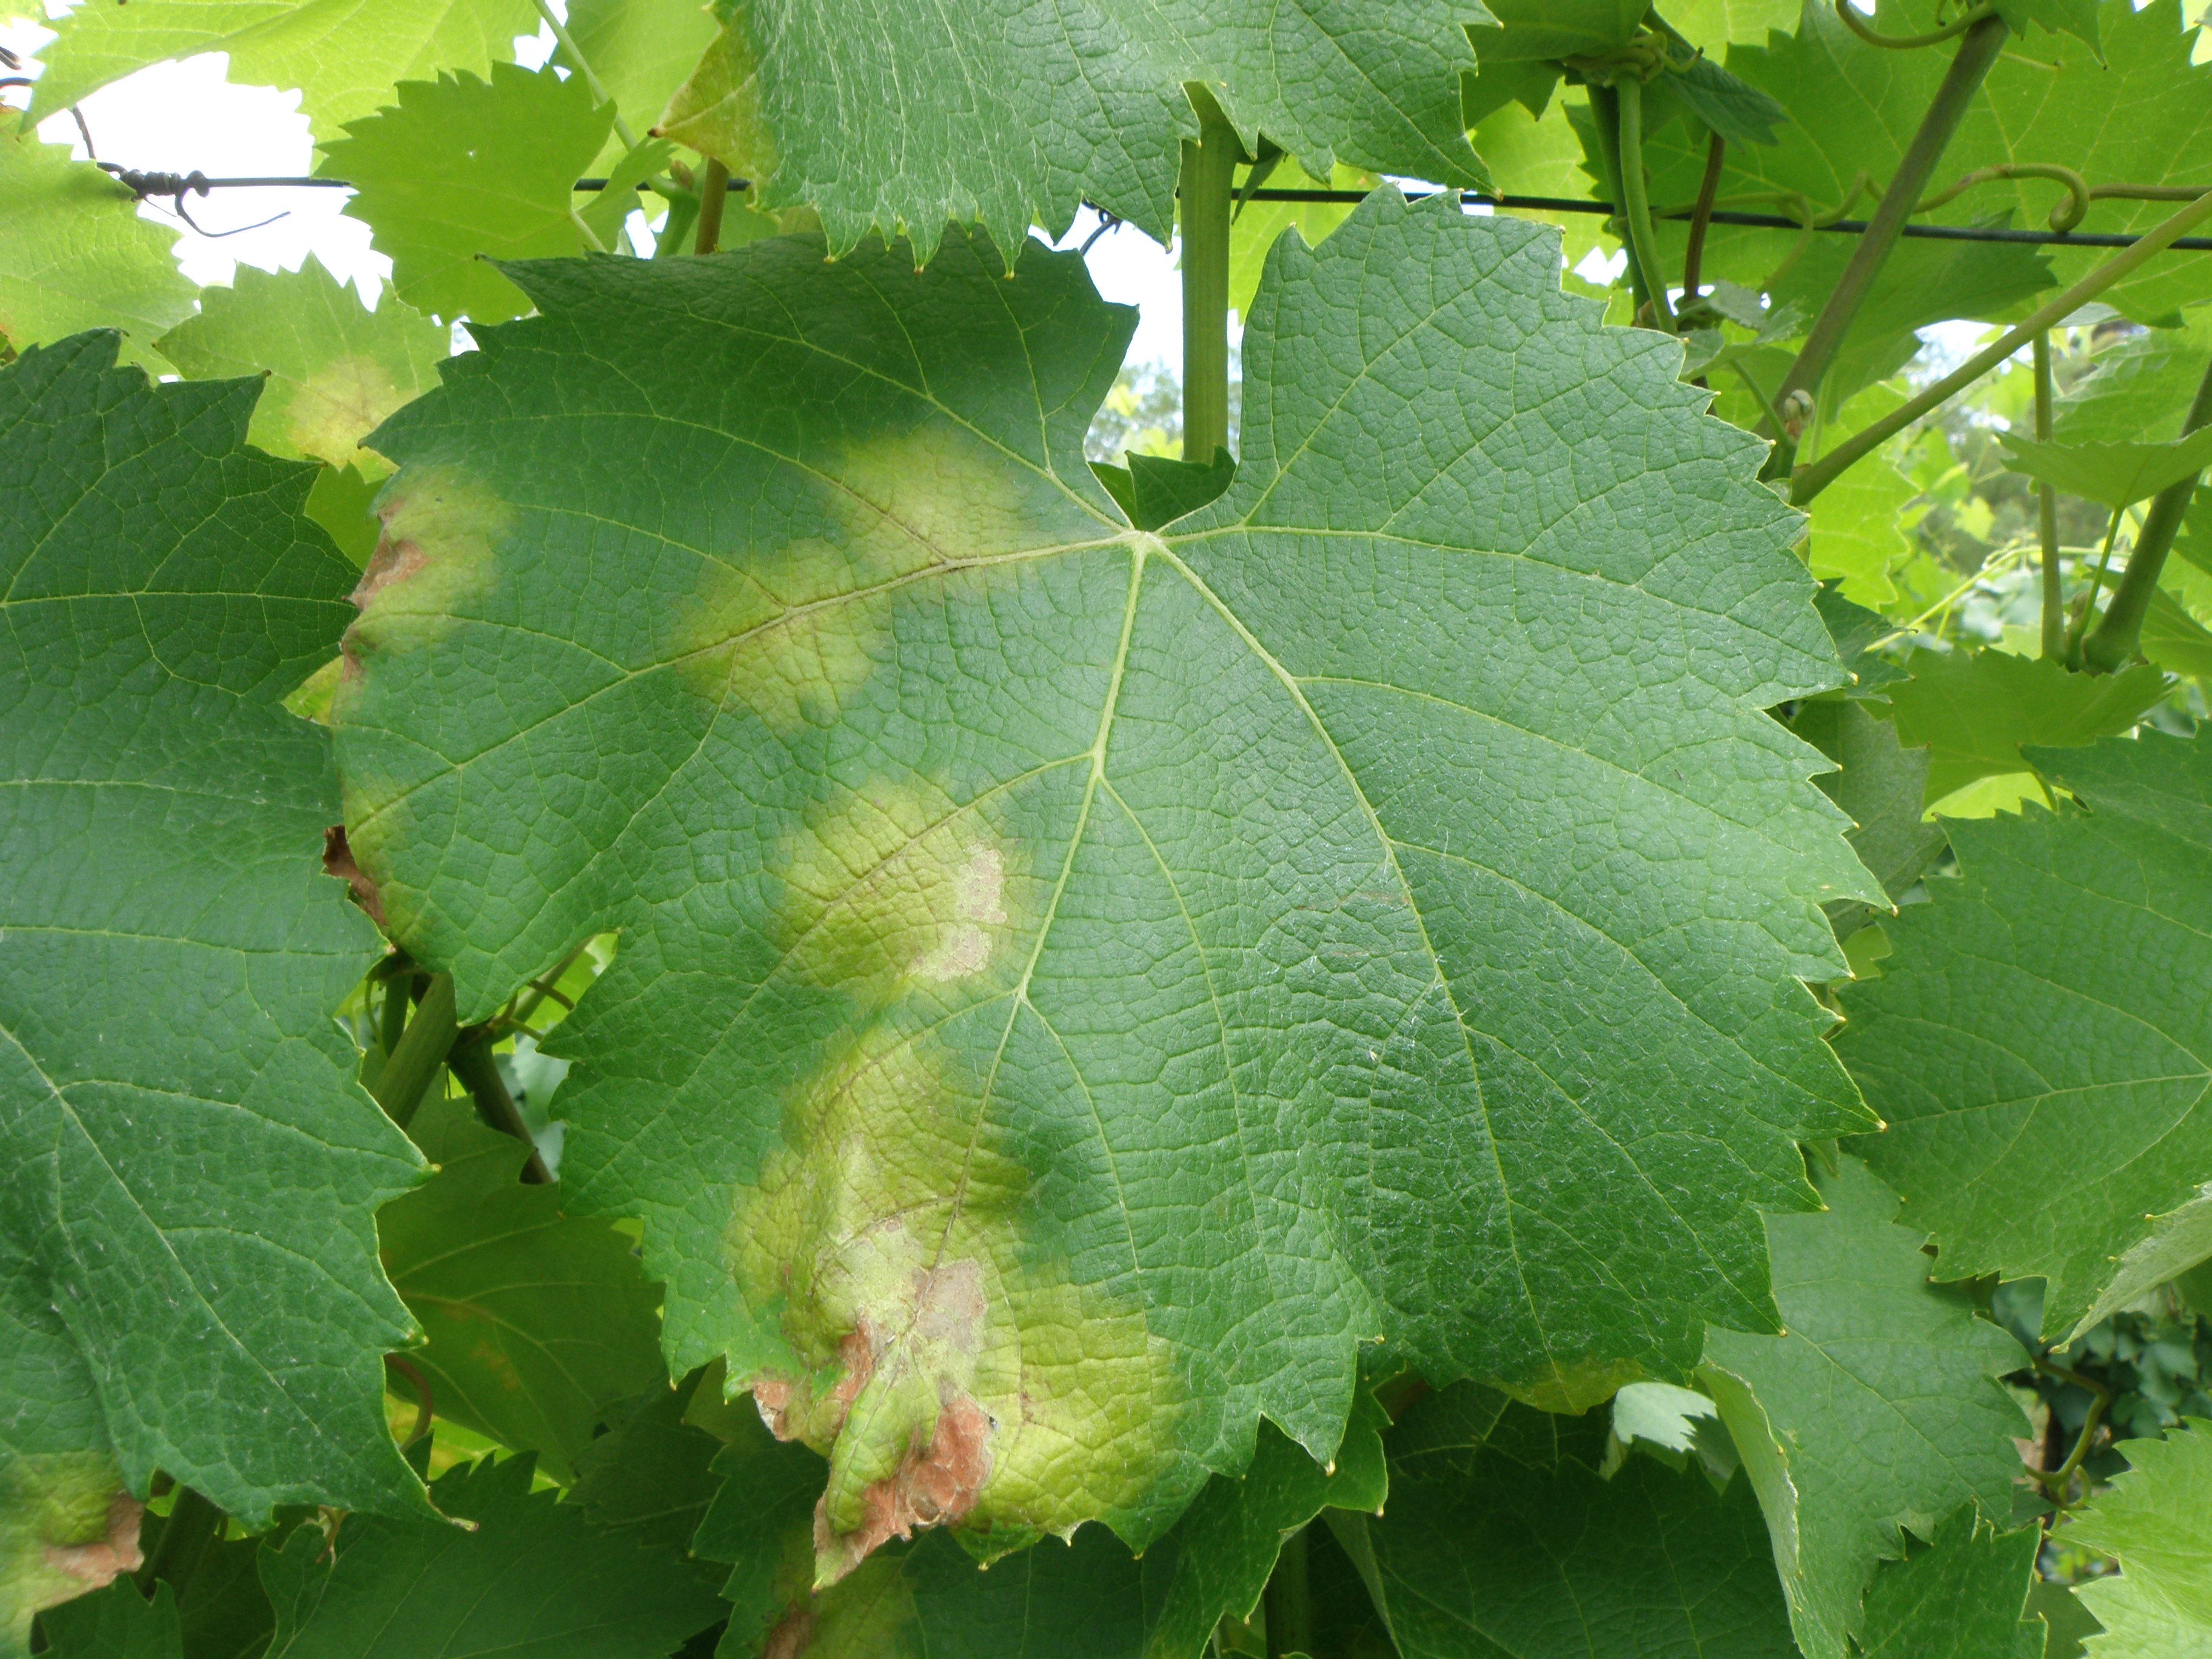 downy mildew in bunches